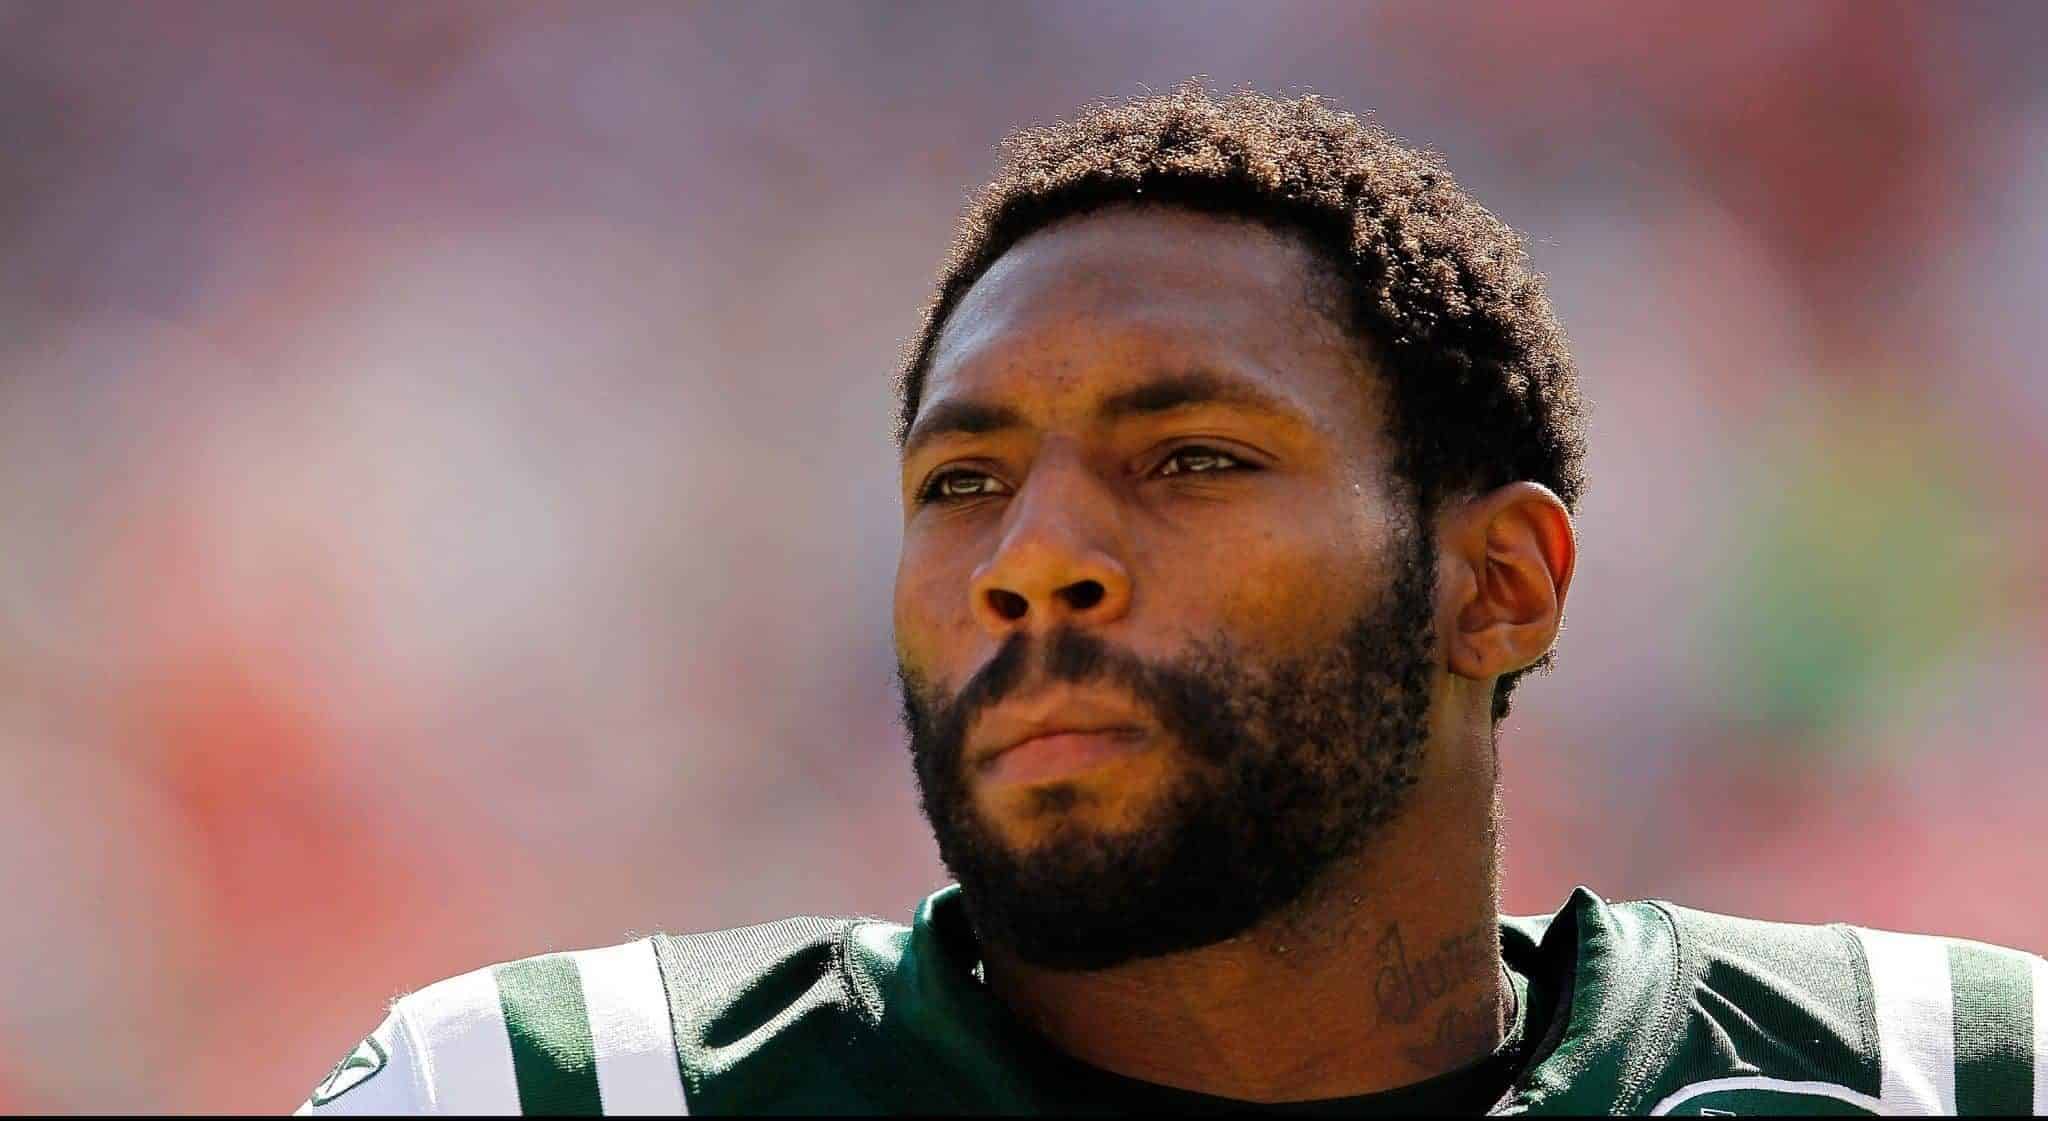 MIAMI GARDENS, FL - JANUARY 01: Antonio Cromartie #31 of the New York Jets looks on during a game against the Miami Dolphins at Sun Life Stadium on January 1, 2012 in Miami Gardens, Florida.